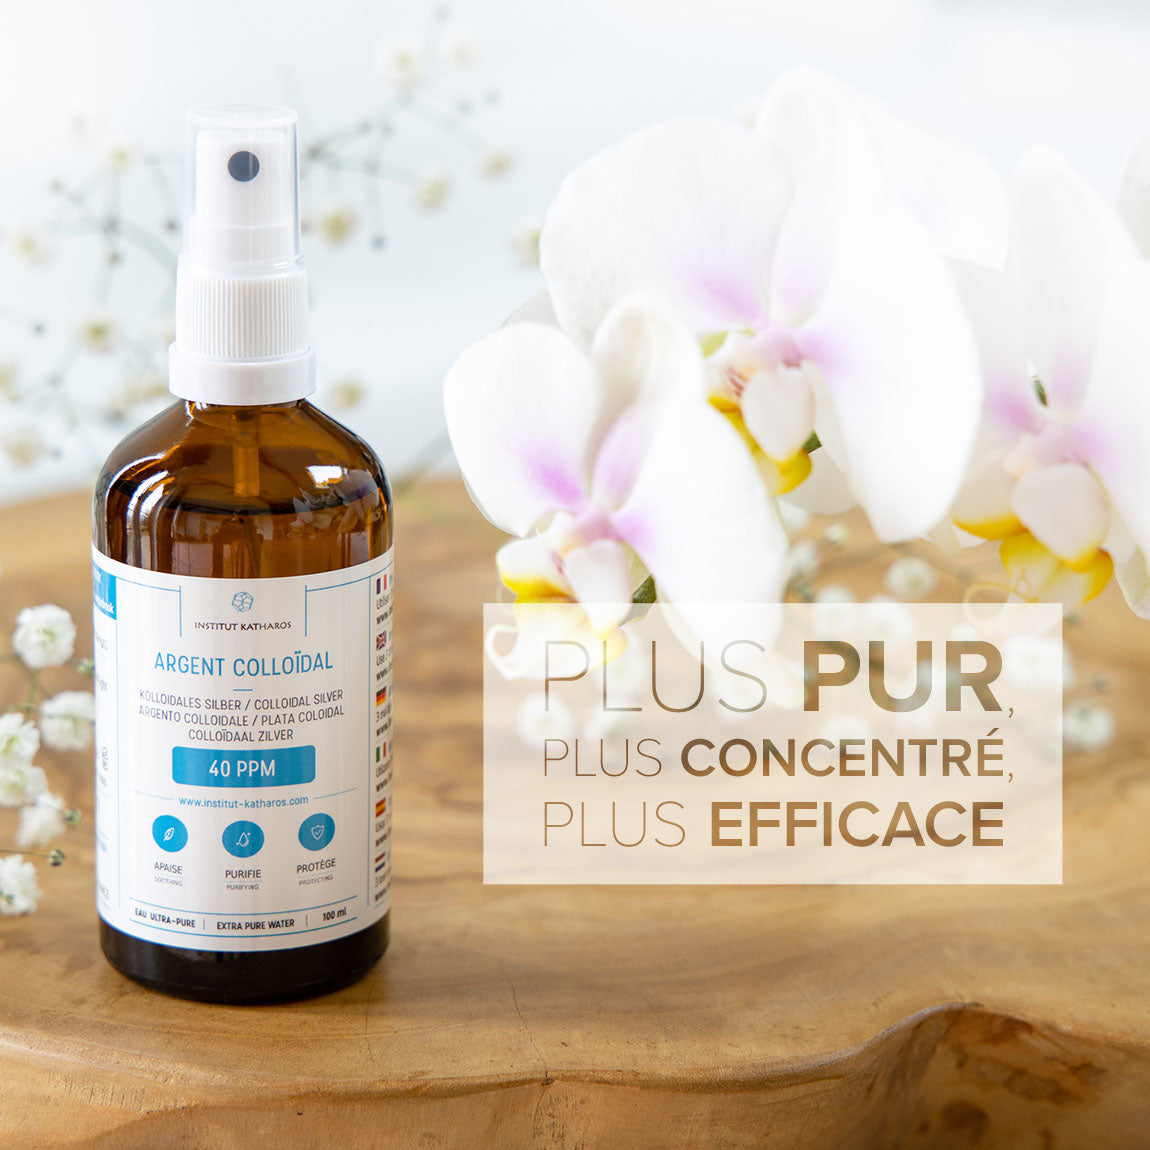 EXCLU MAG > SPRAY NACRE ARGENT ALIMENTAIRE 50ML : CuistoShop